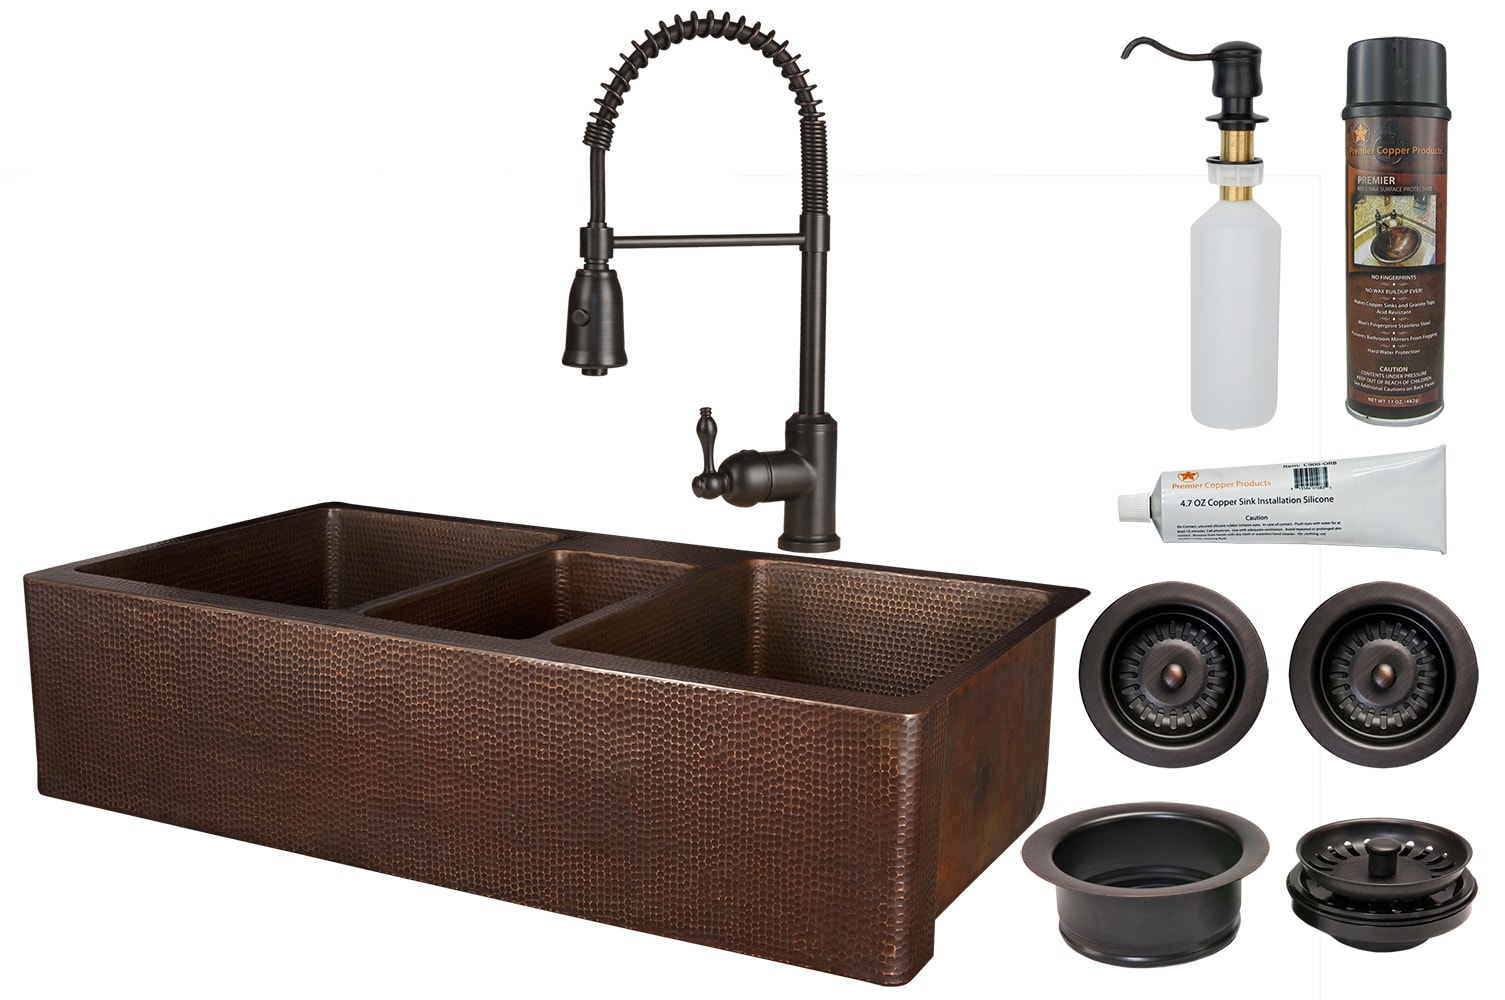 Premier Copper Products Ksp4 Katdb422210 Oil Rubbed Bronze 42 Hammered Copper 40 20 40 Triple Basin Farmhouse Kitchen Sink With 1 8 Gpm Spring Pull Down Faucet Matching Drains And Soap Dispenser Faucetdirect Com